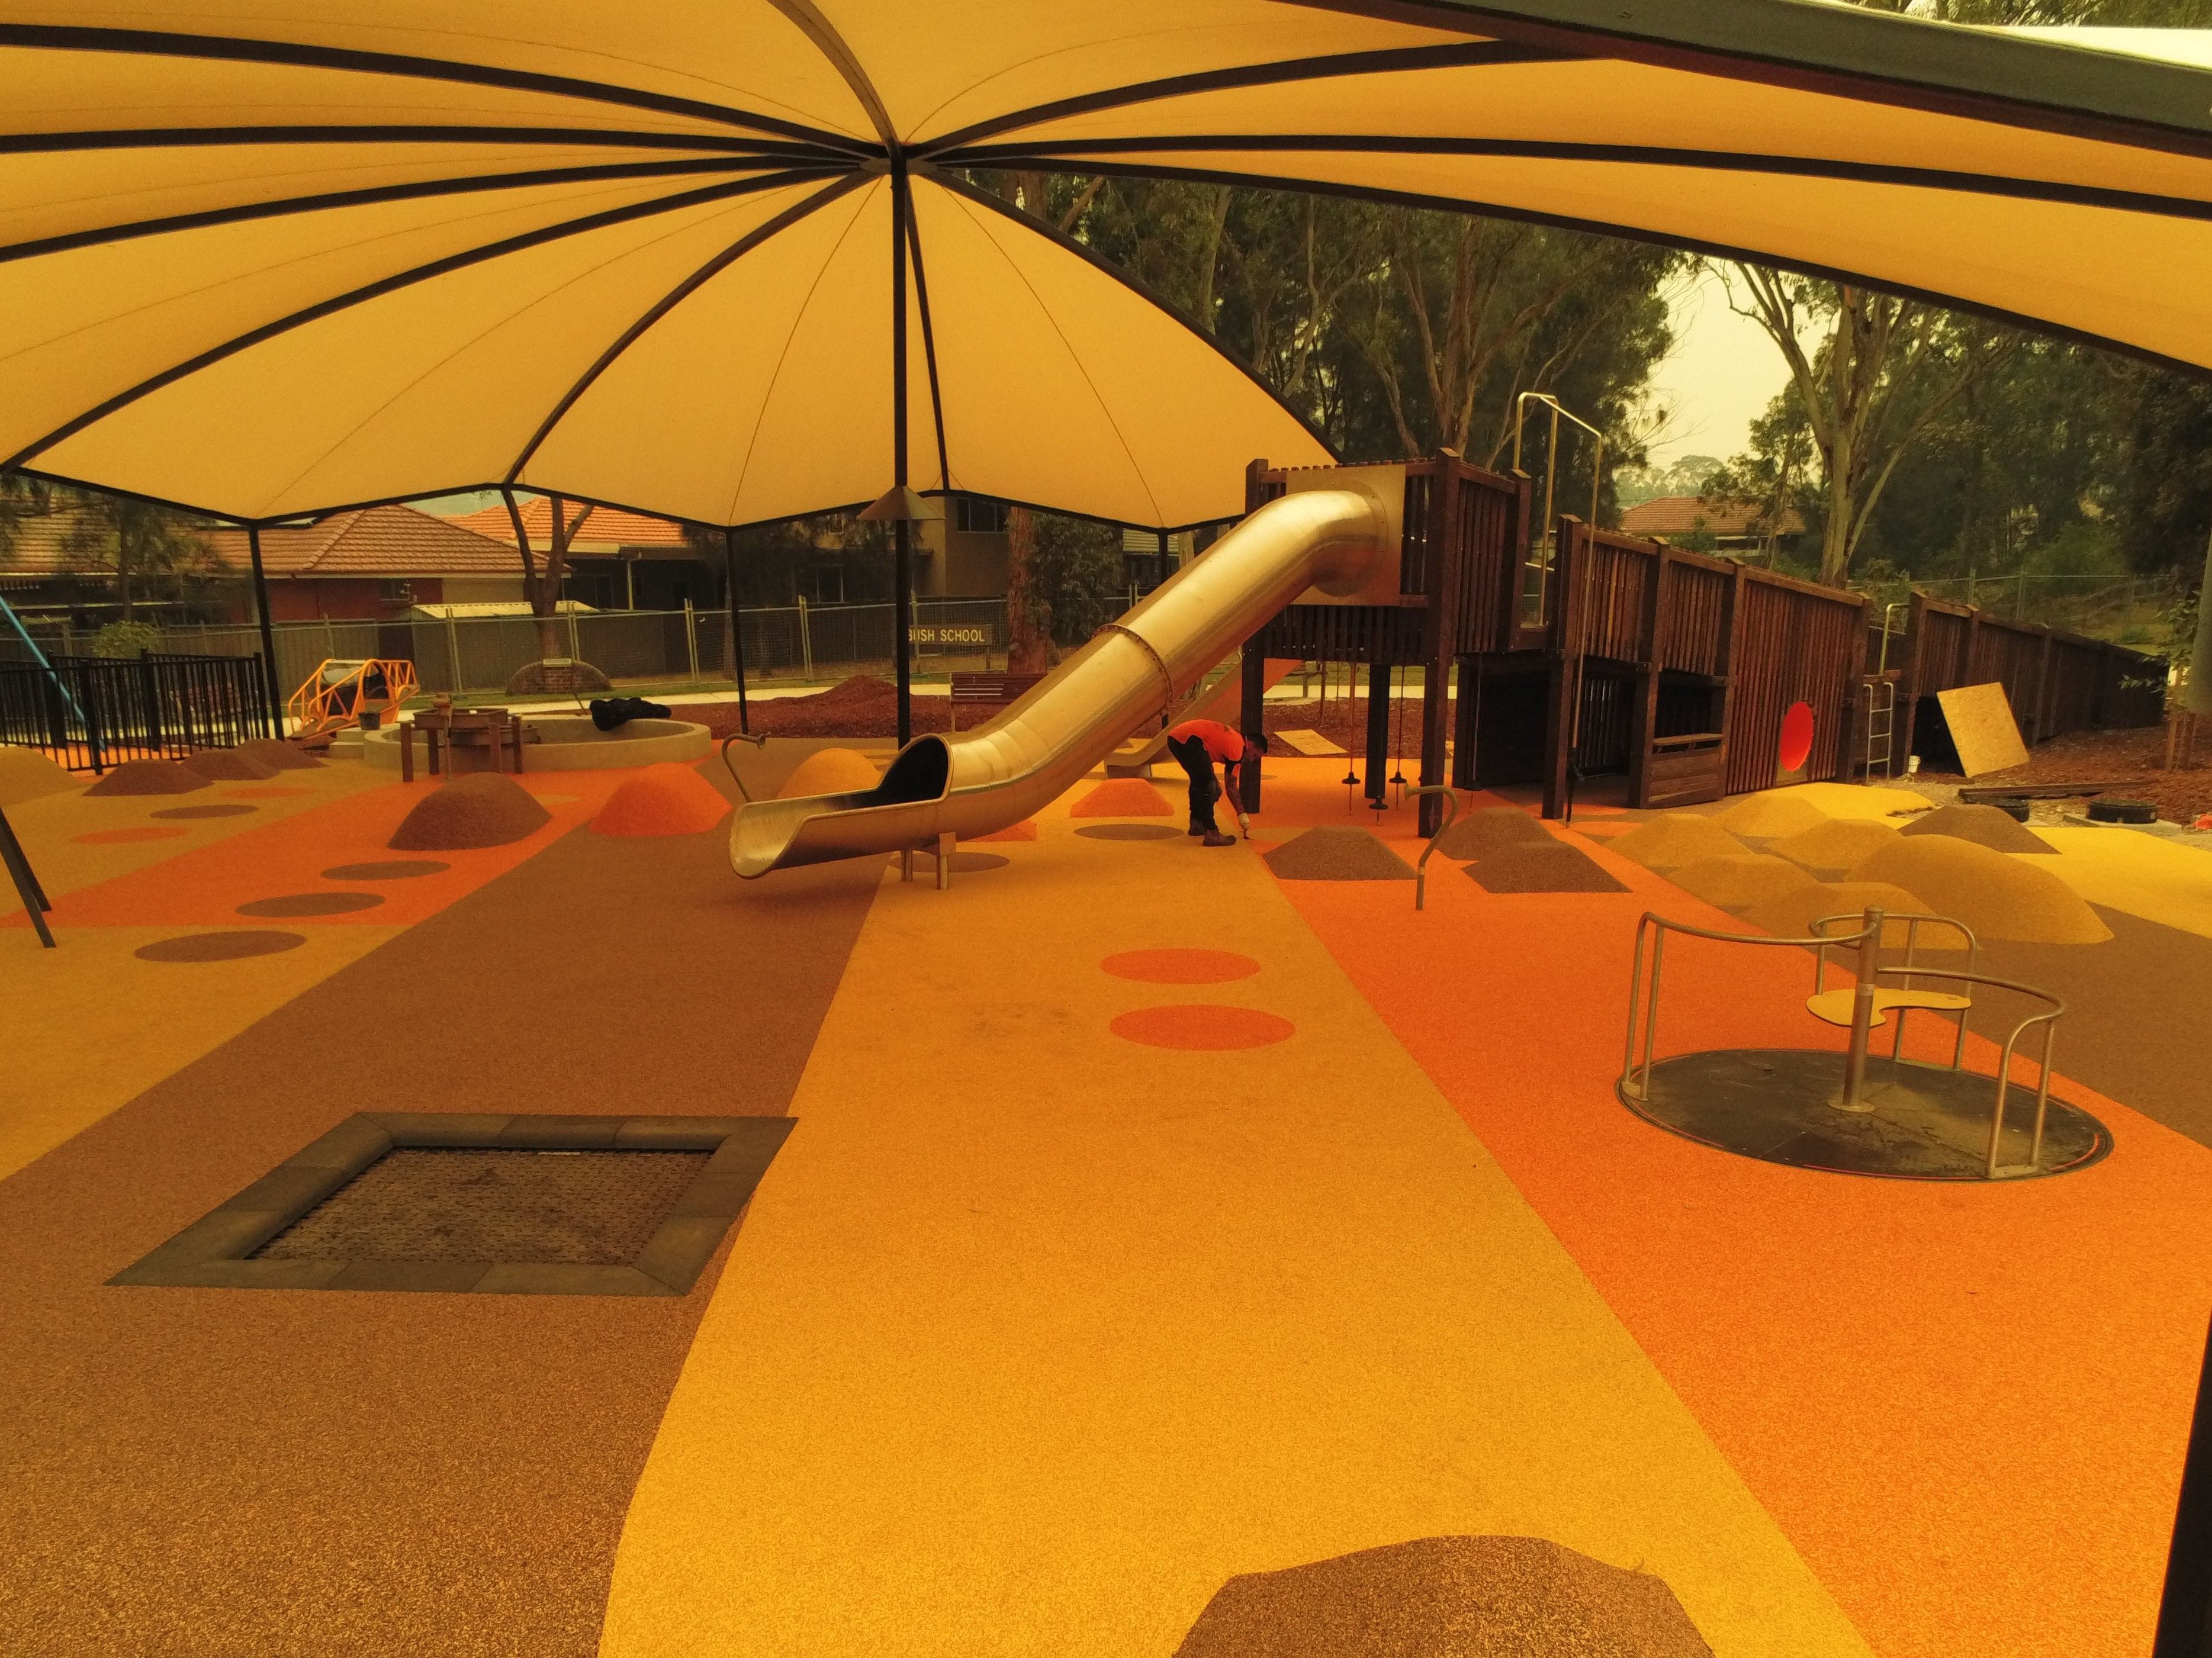 Synthatech Australia - Central Gardens All Ability Playground Image -5e1d2c2cb0666